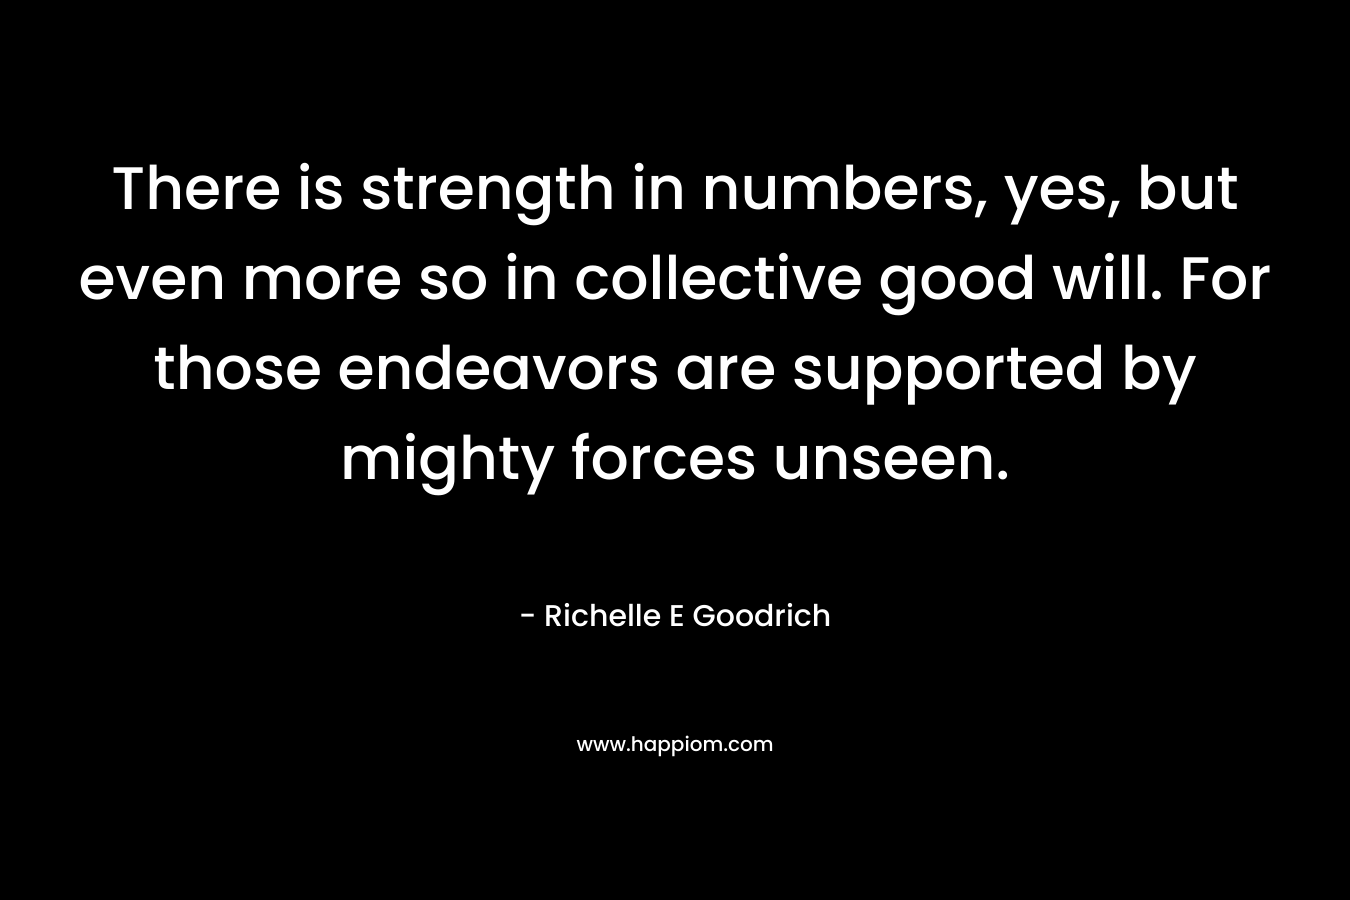 There is strength in numbers, yes, but even more so in collective good will. For those endeavors are supported by mighty forces unseen.